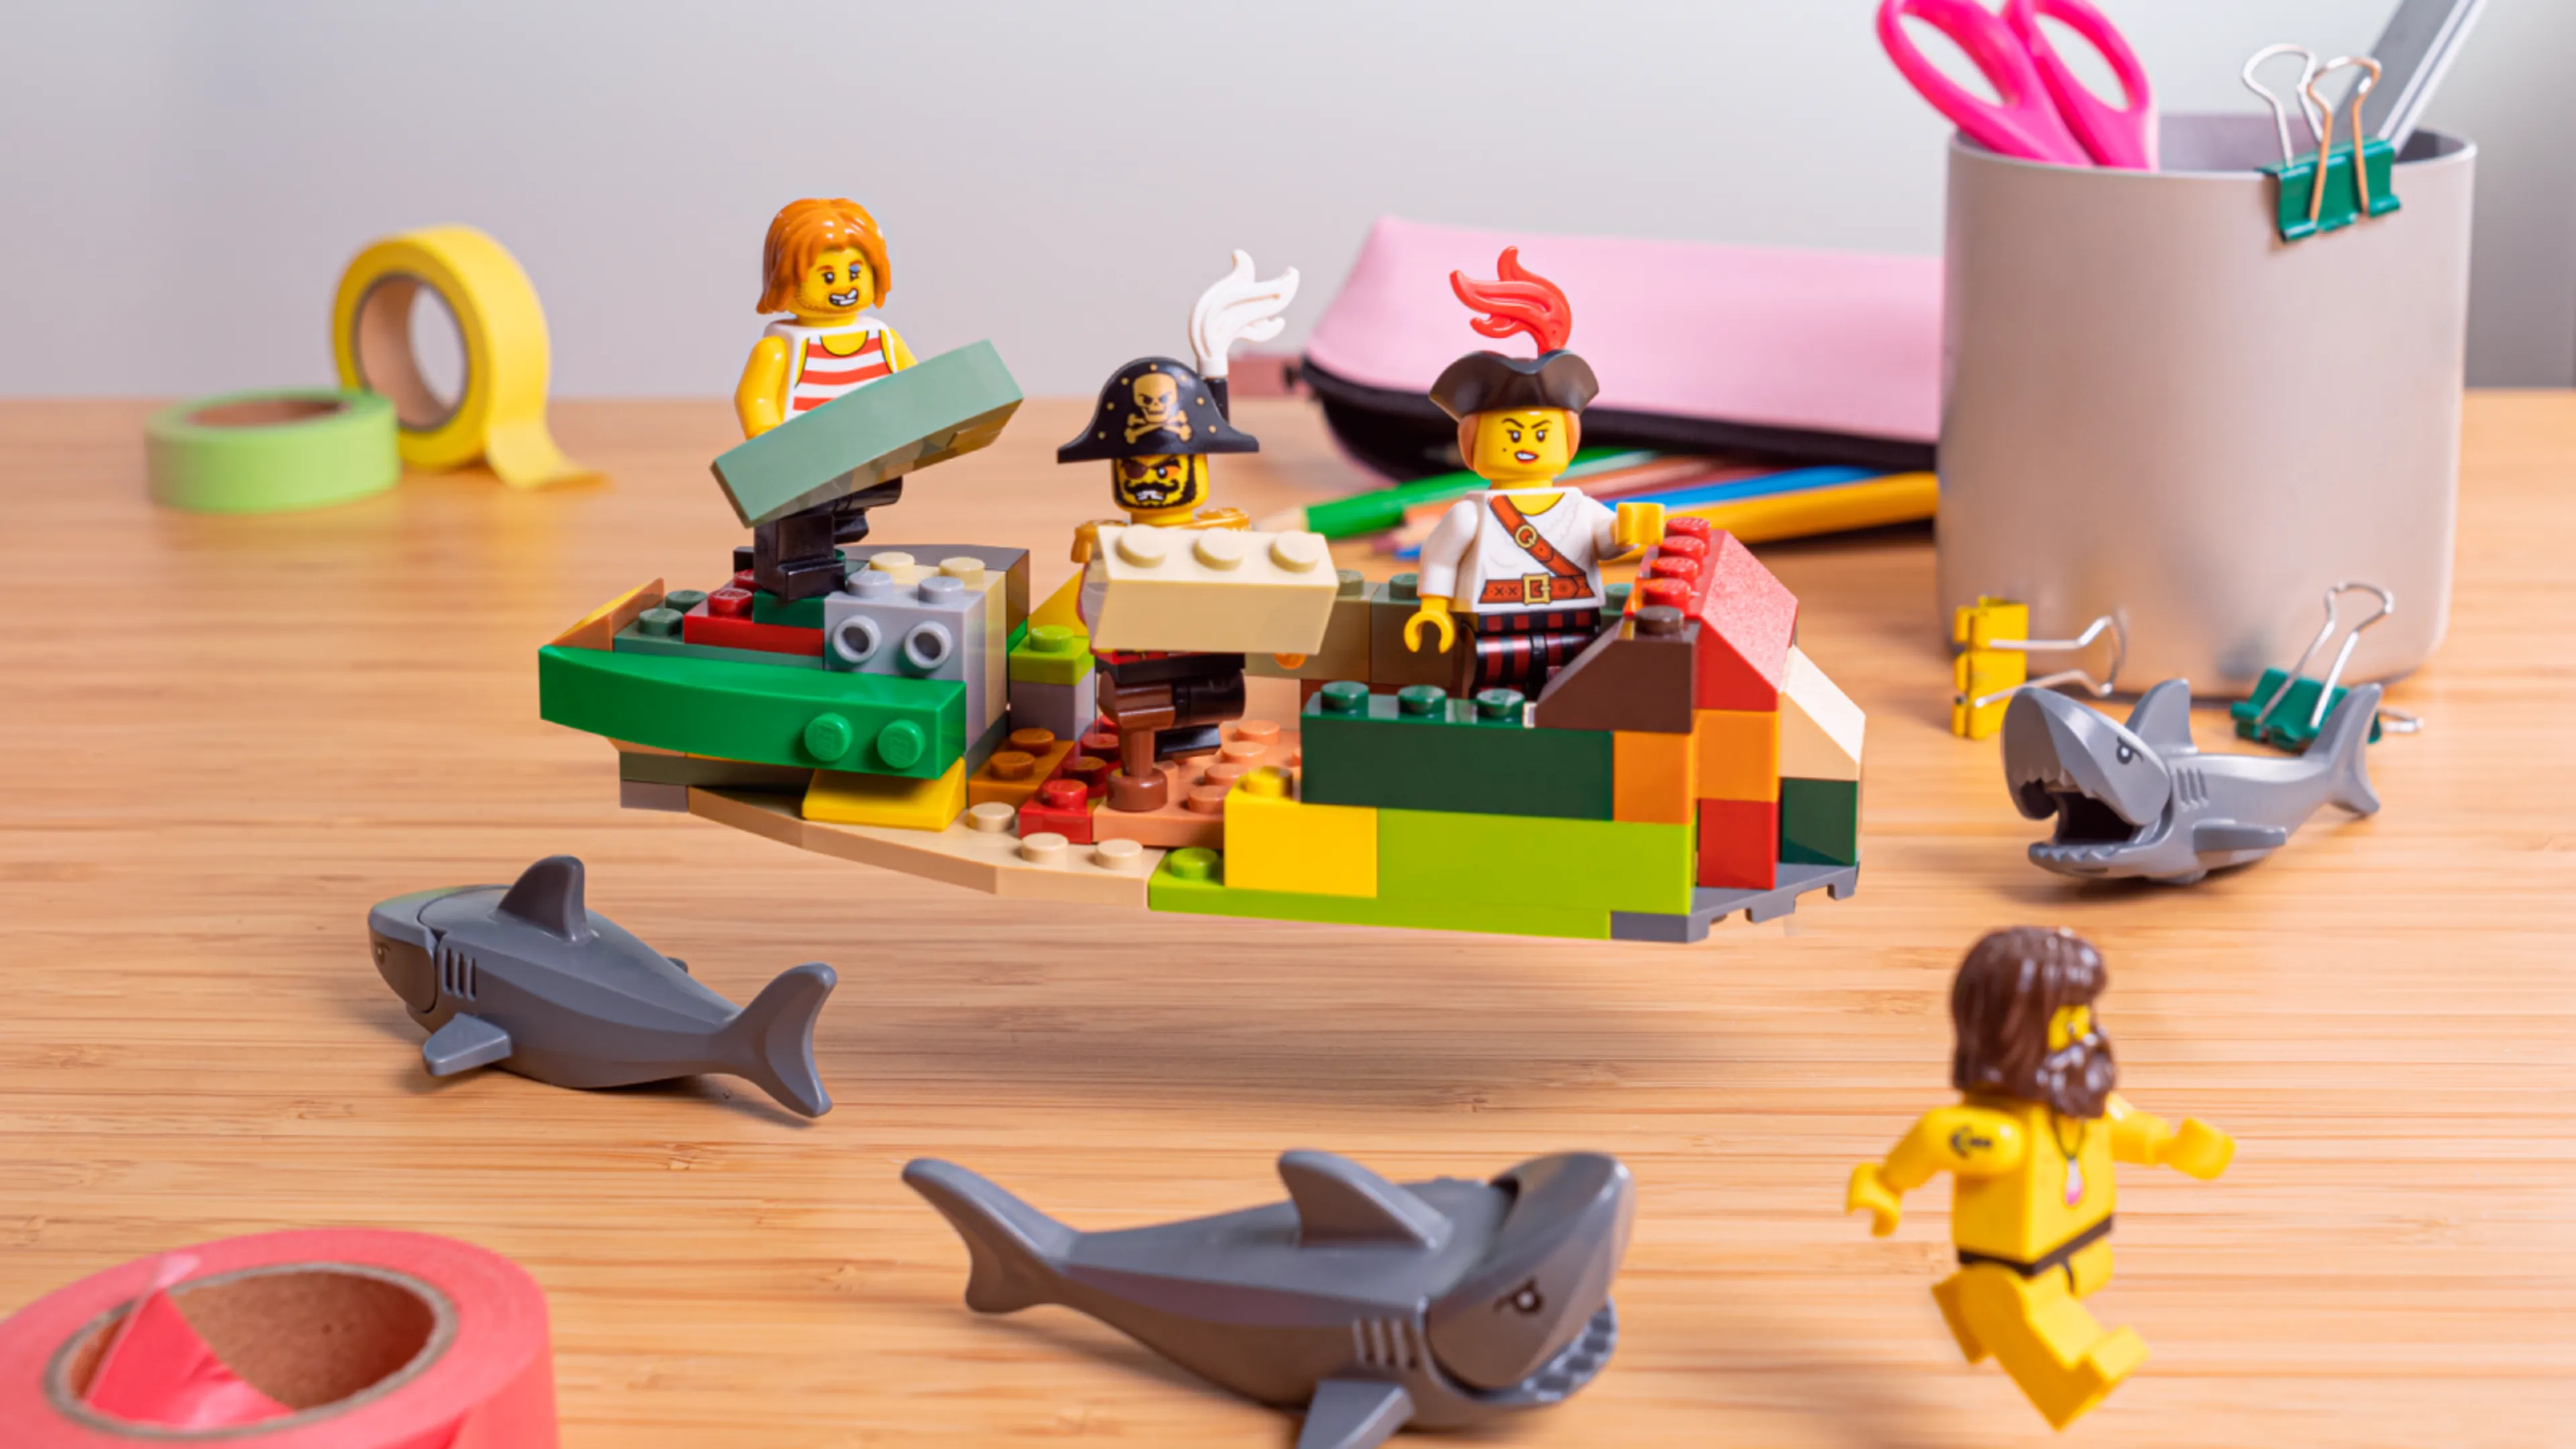 Minifigures building the sides of the ship, surrounded by sharks